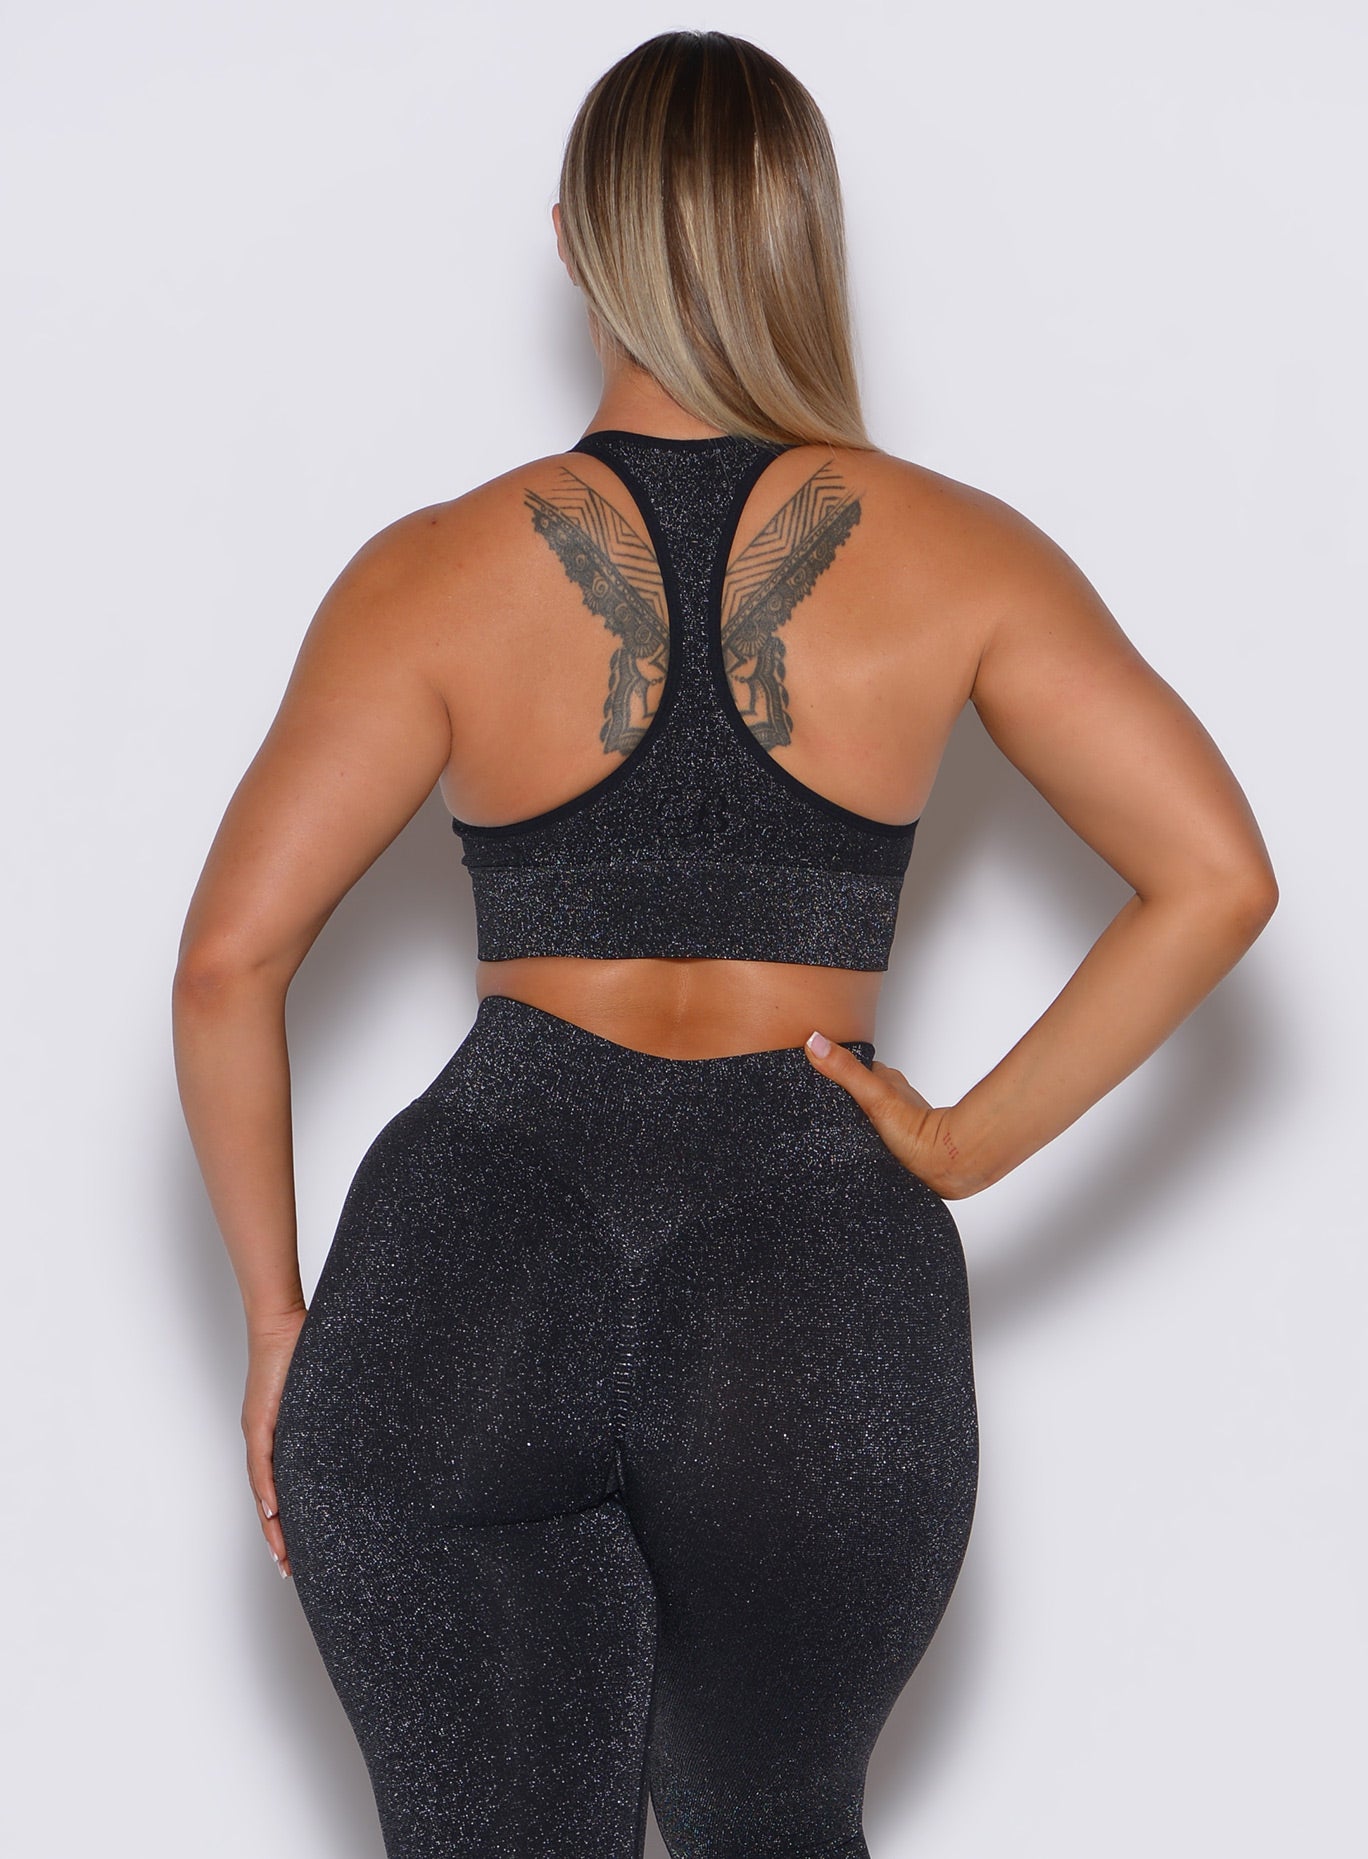 Back profile view of a model wearing our Shimmer Seamless Bra in black sparkle color along with the matching leggings